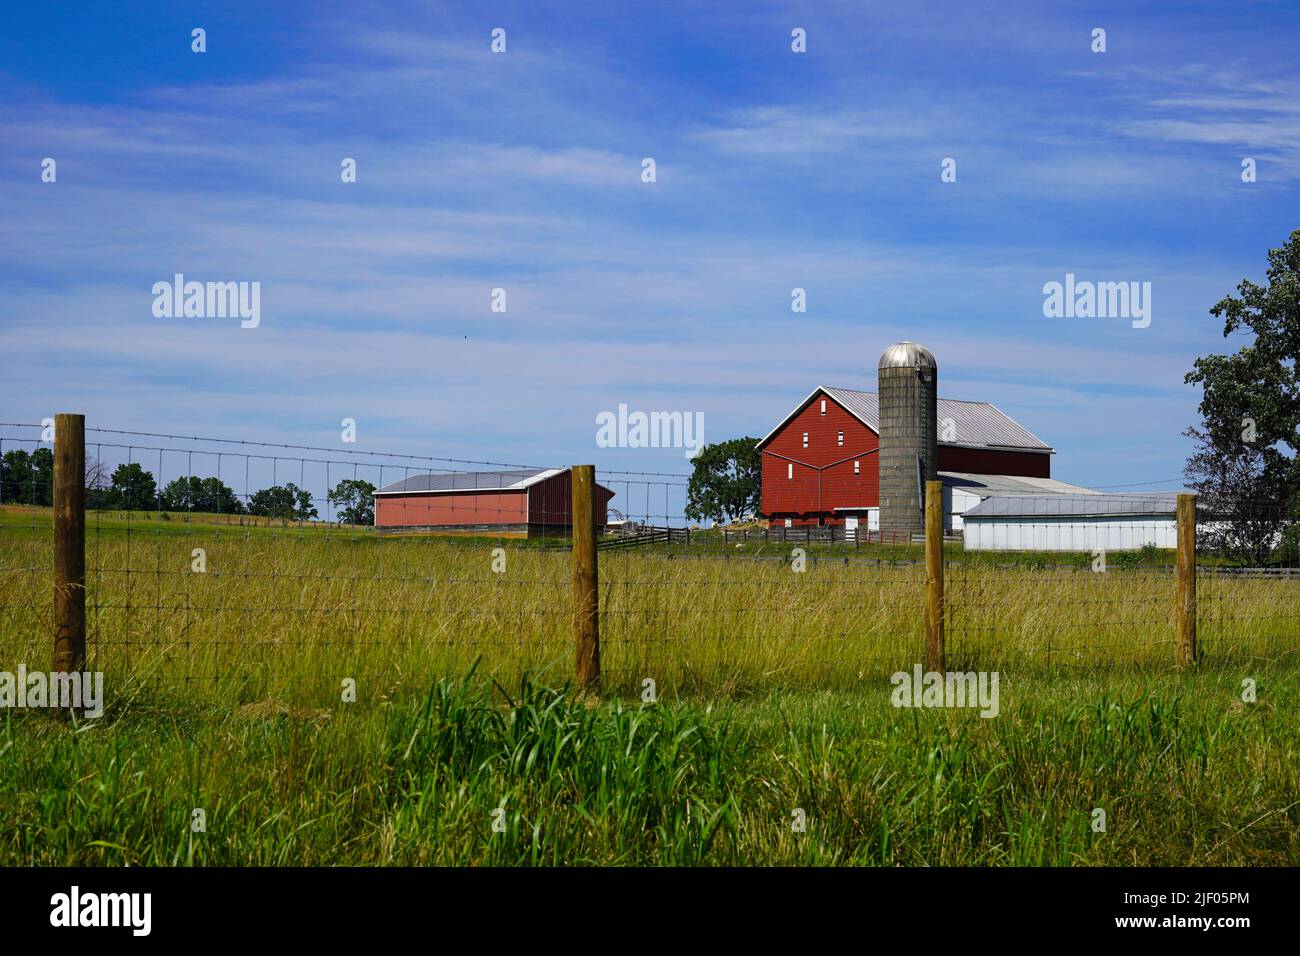 Red barn with a silo next to a field Stock Photo